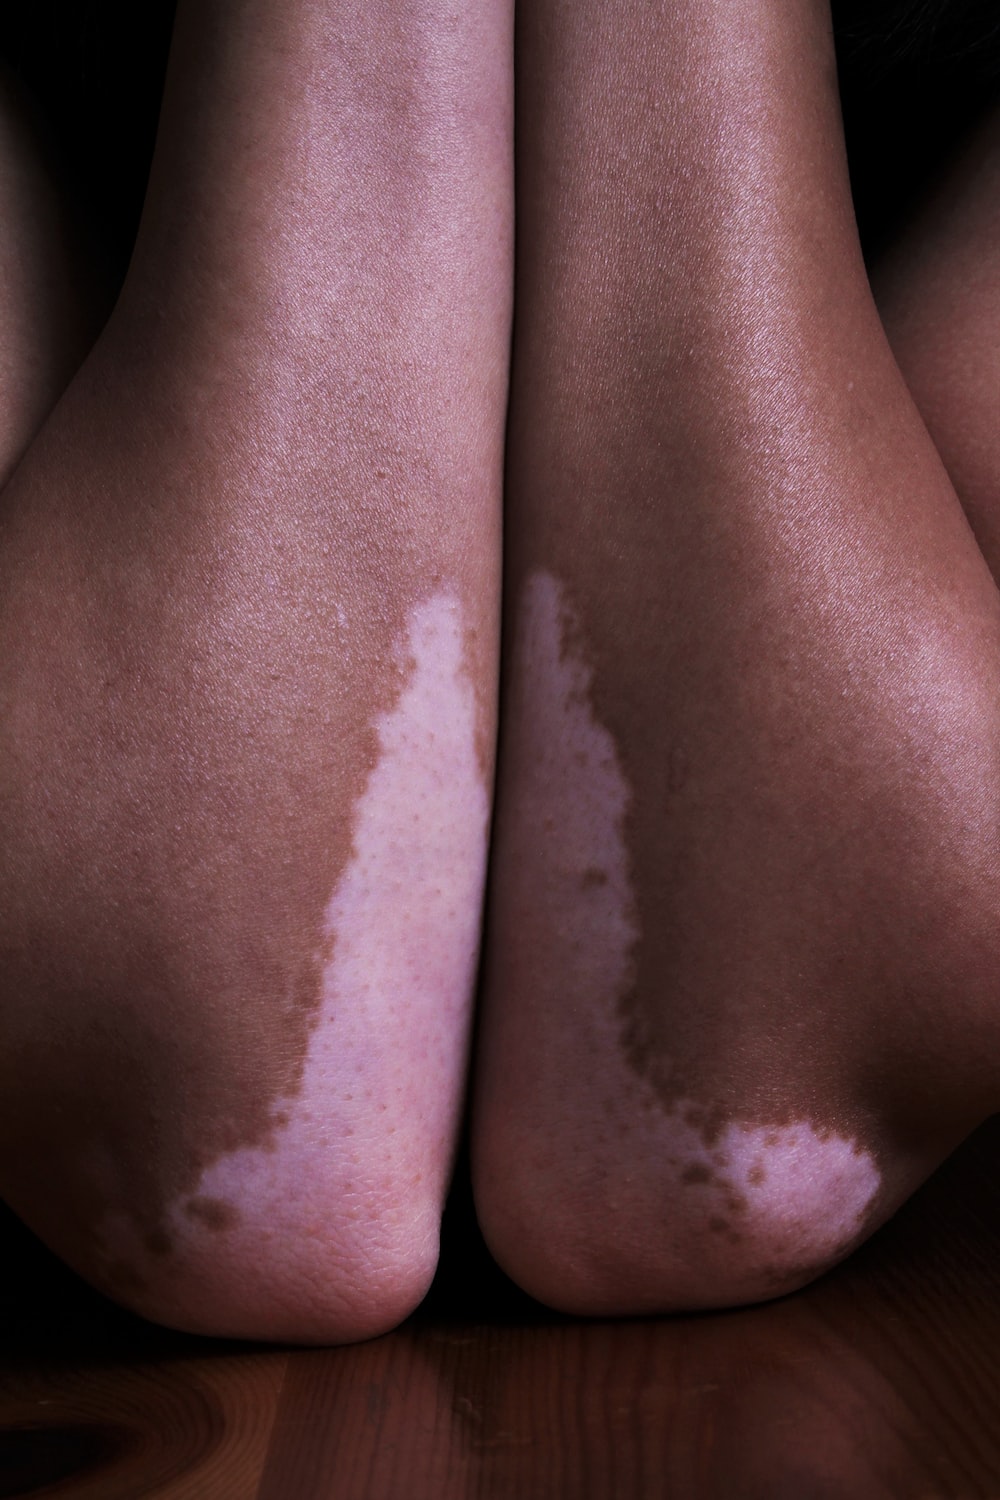 a close up of a person's legs with white spots on them